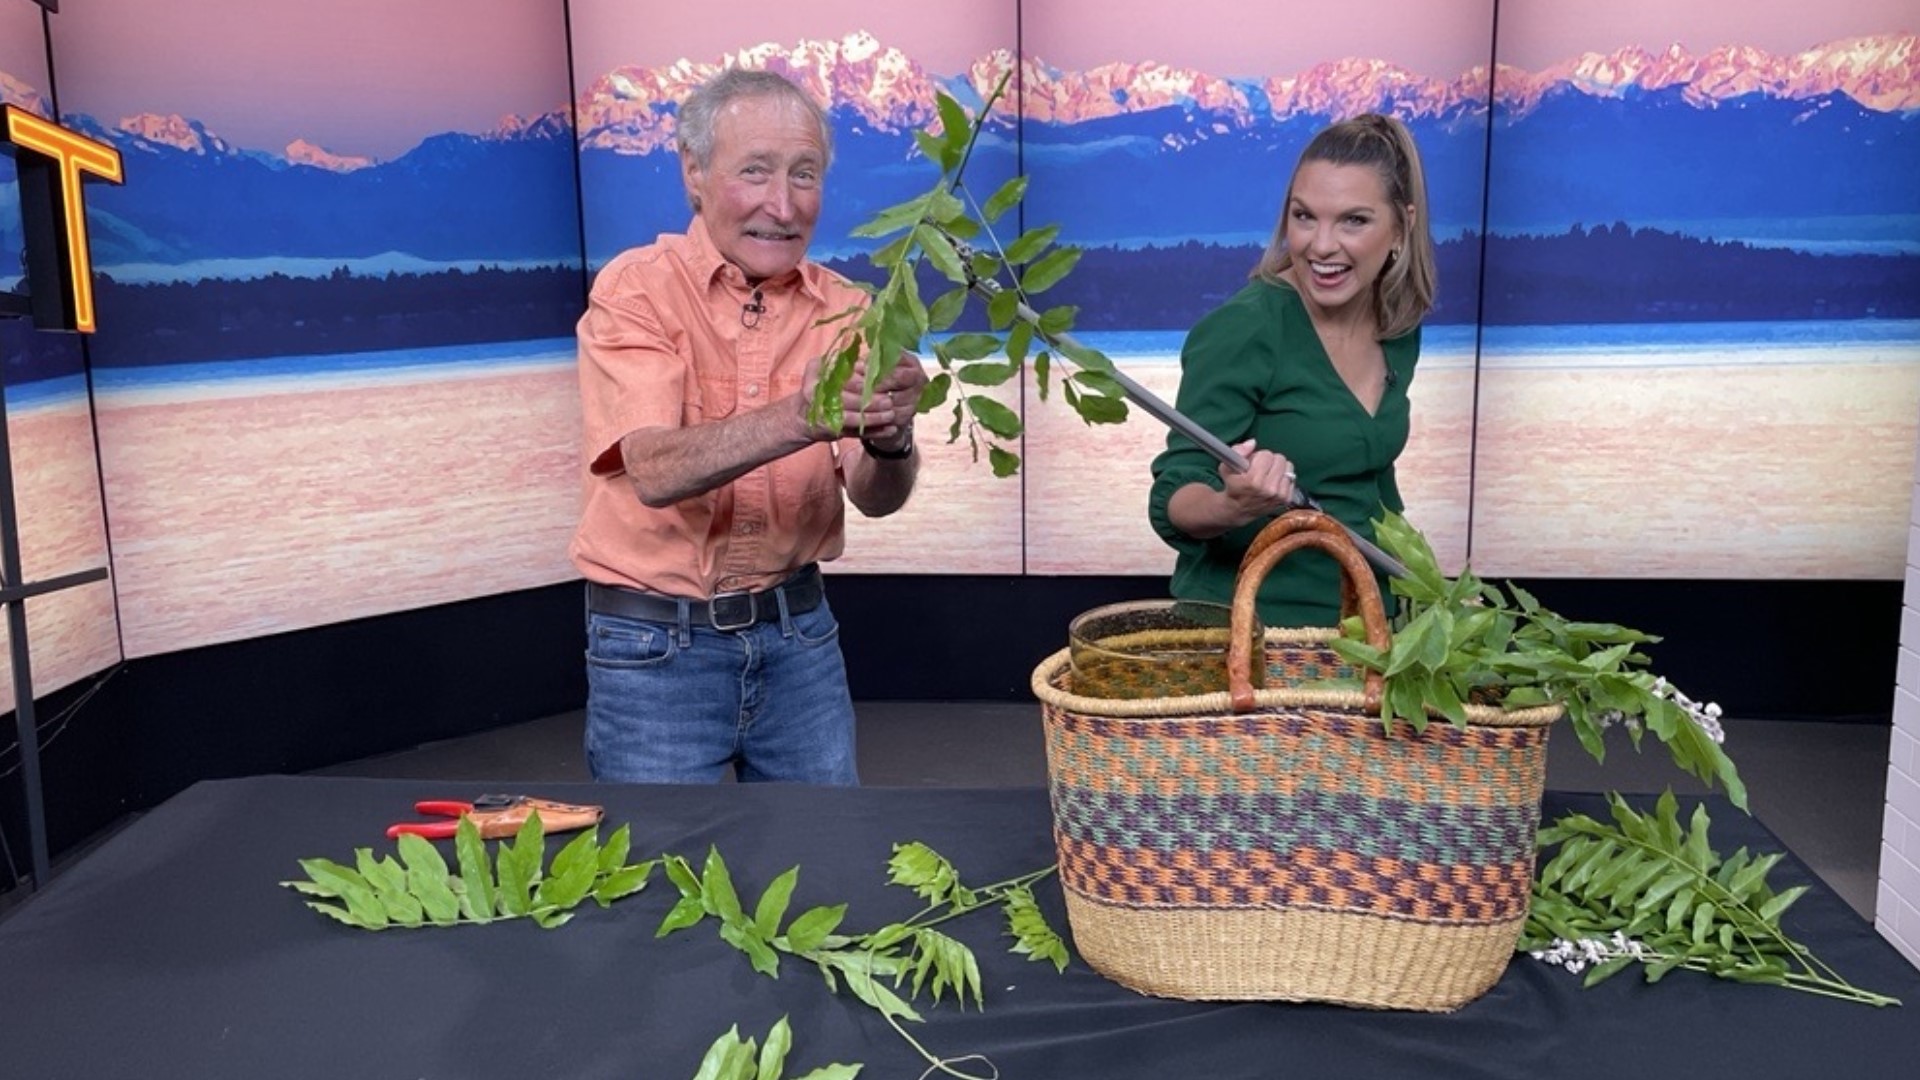 Master gardener Ciscoe Morris says wisteria is spectacular, but it's also a real monster and needs timely pruning. #newdaynw